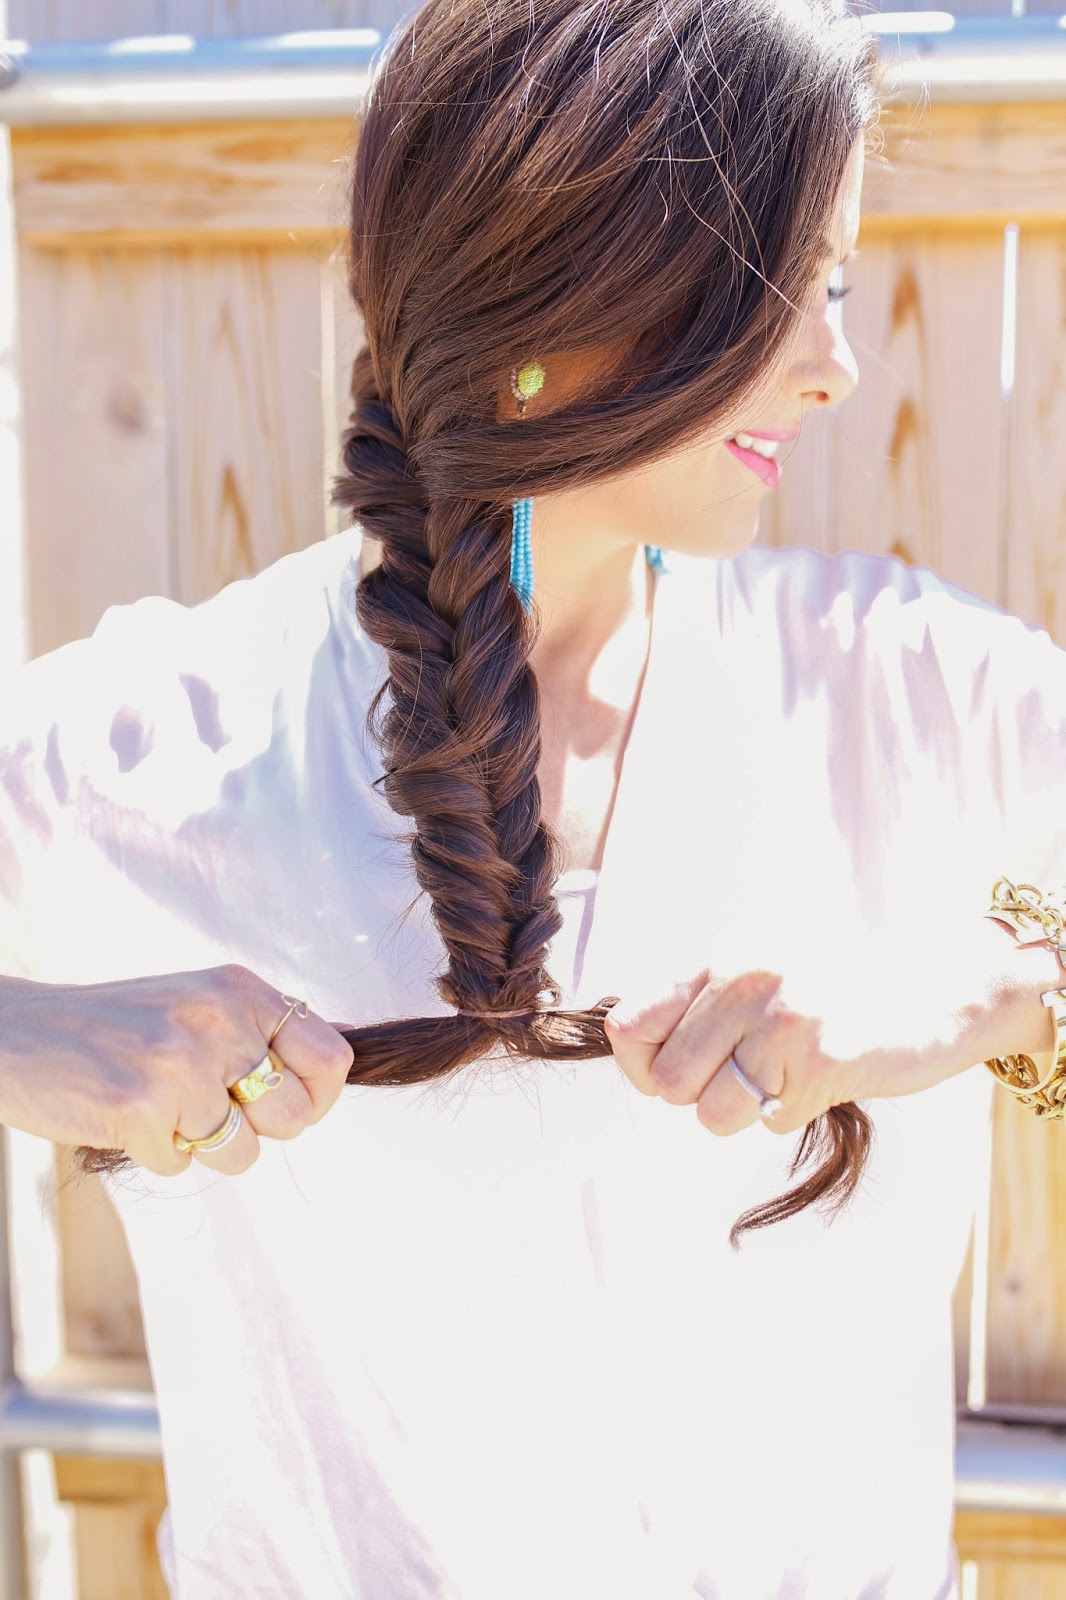 emily gemma hair, the sweetest thing hair, how to fishtail, messy fishtail braid, how to make a messy fishtail, bauble bar, turquoise tassel earrings, delyn evolve sessions, miles witt boyer, beauty blog, hair tutorials with braids